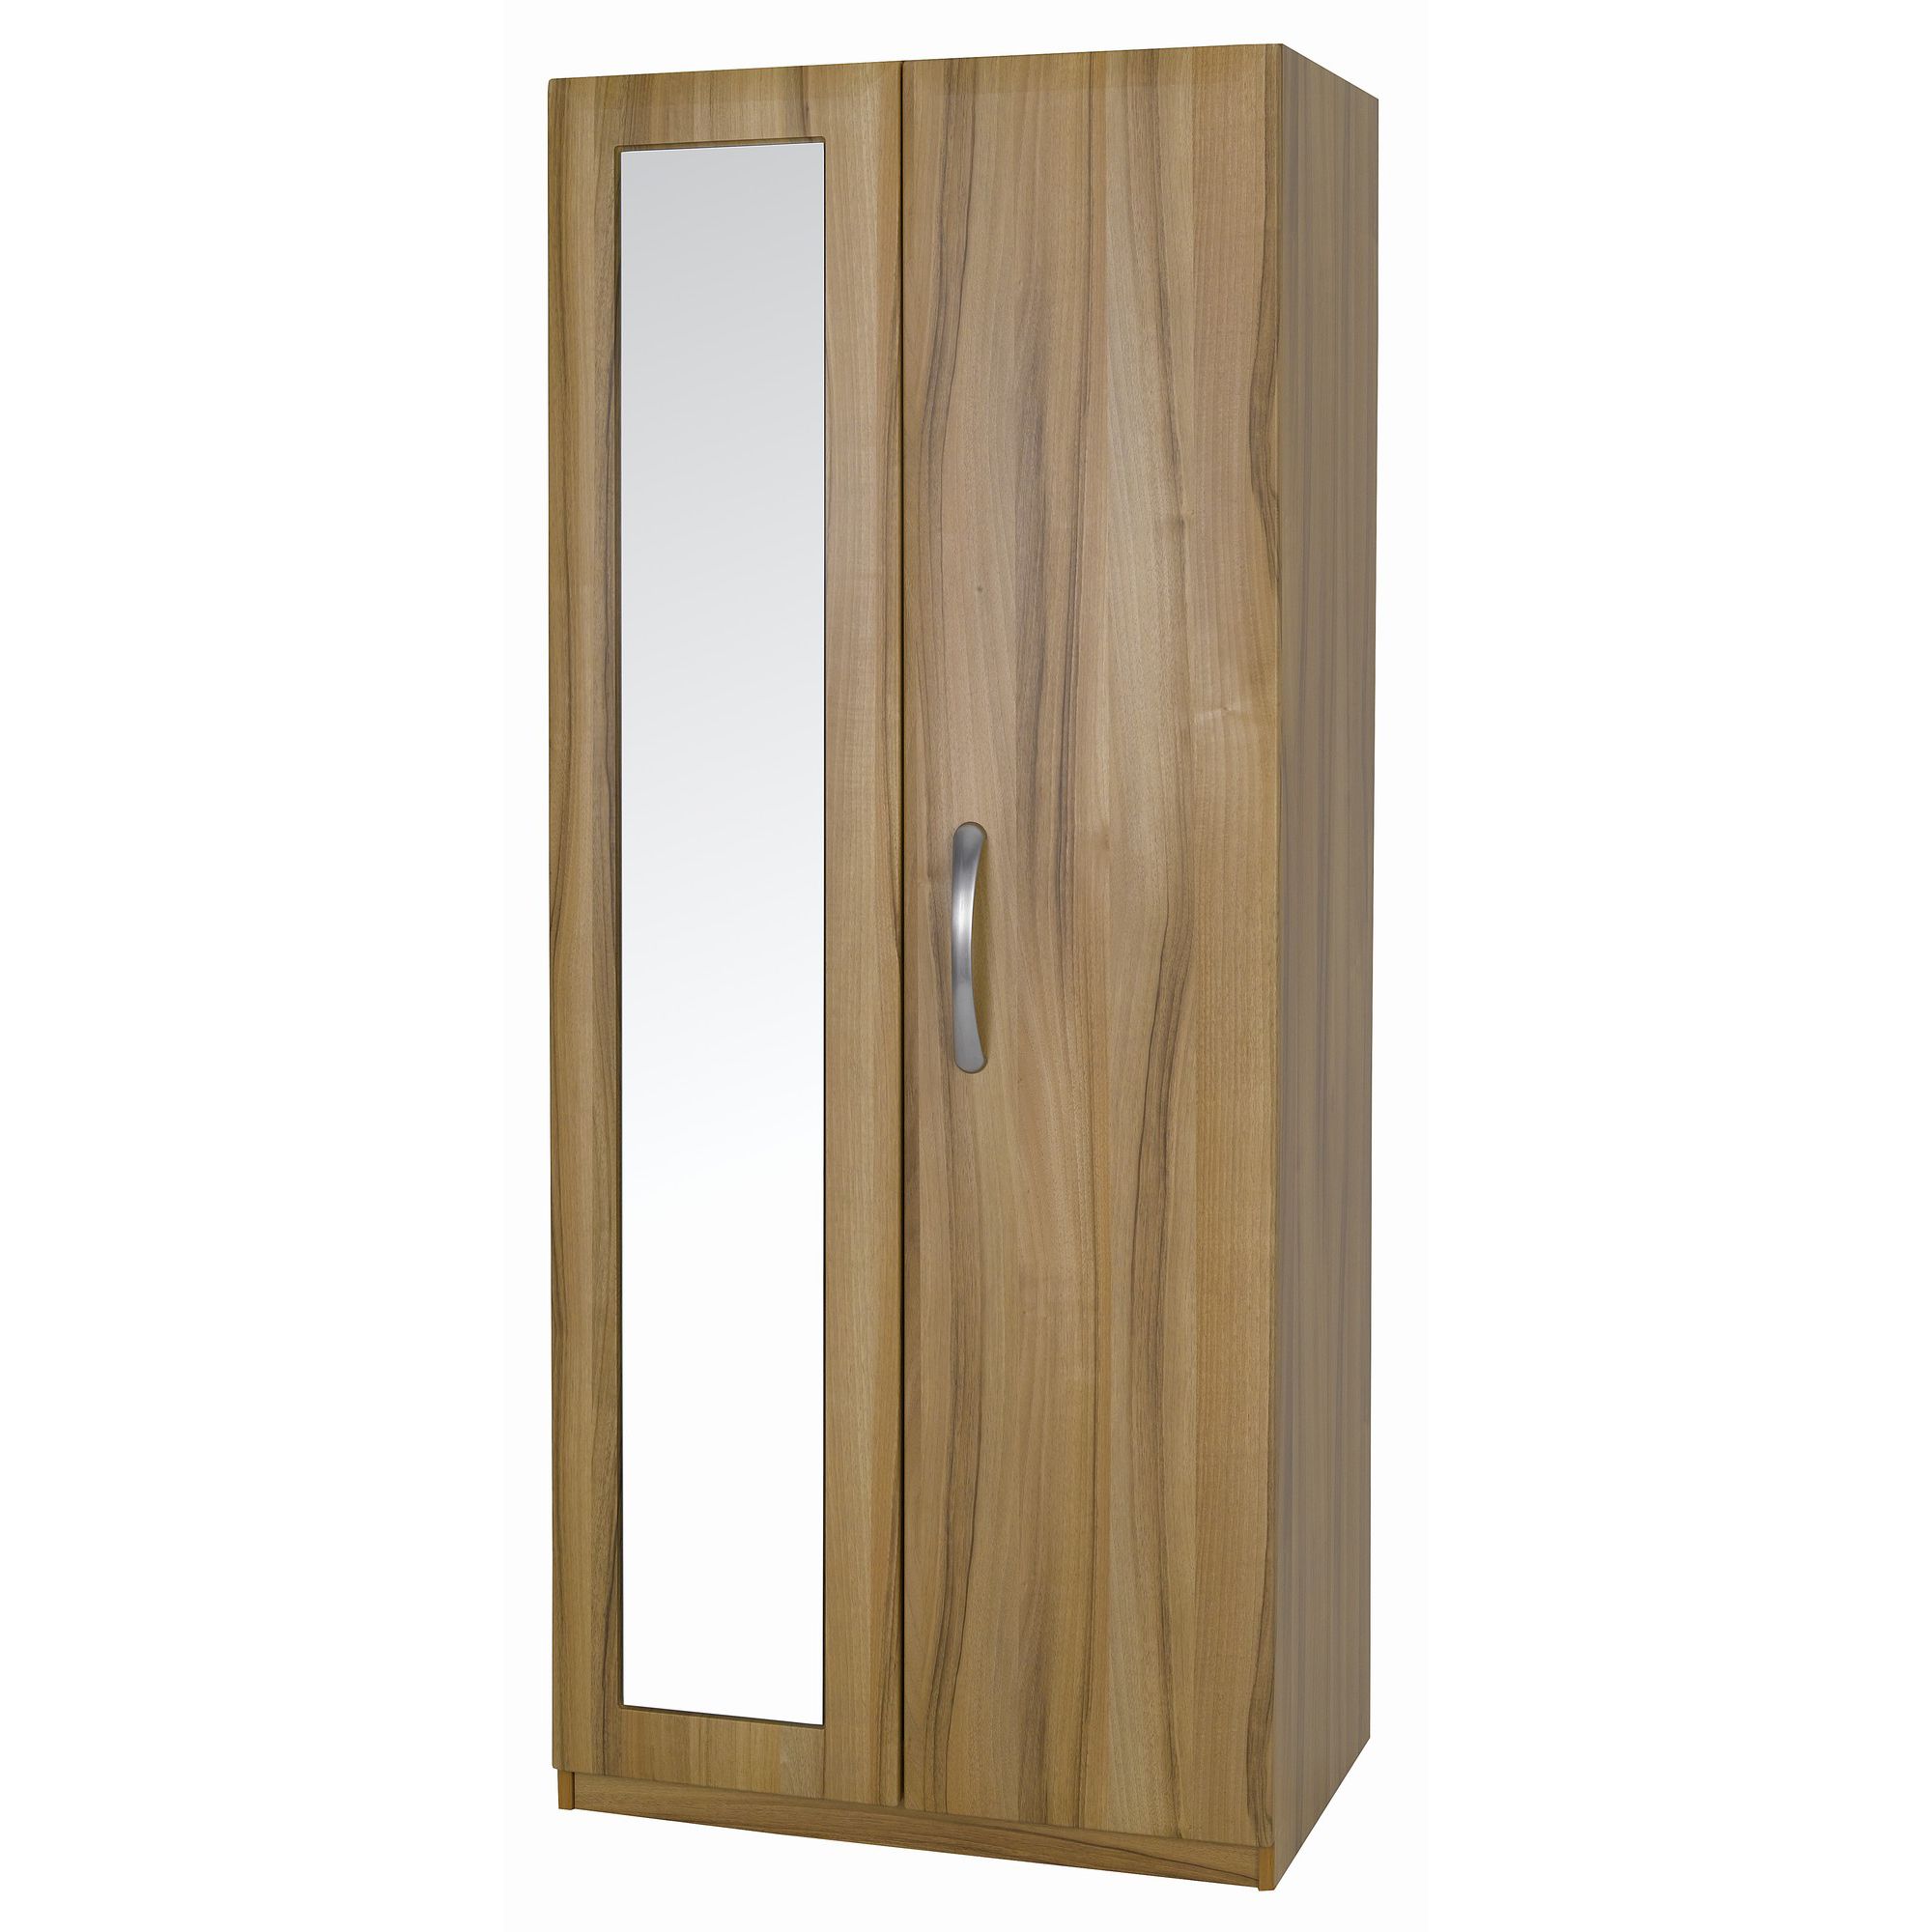 Alto Furniture Visualise Tipolo Wardrobe with Mirror in Golden Walnut at Tesco Direct